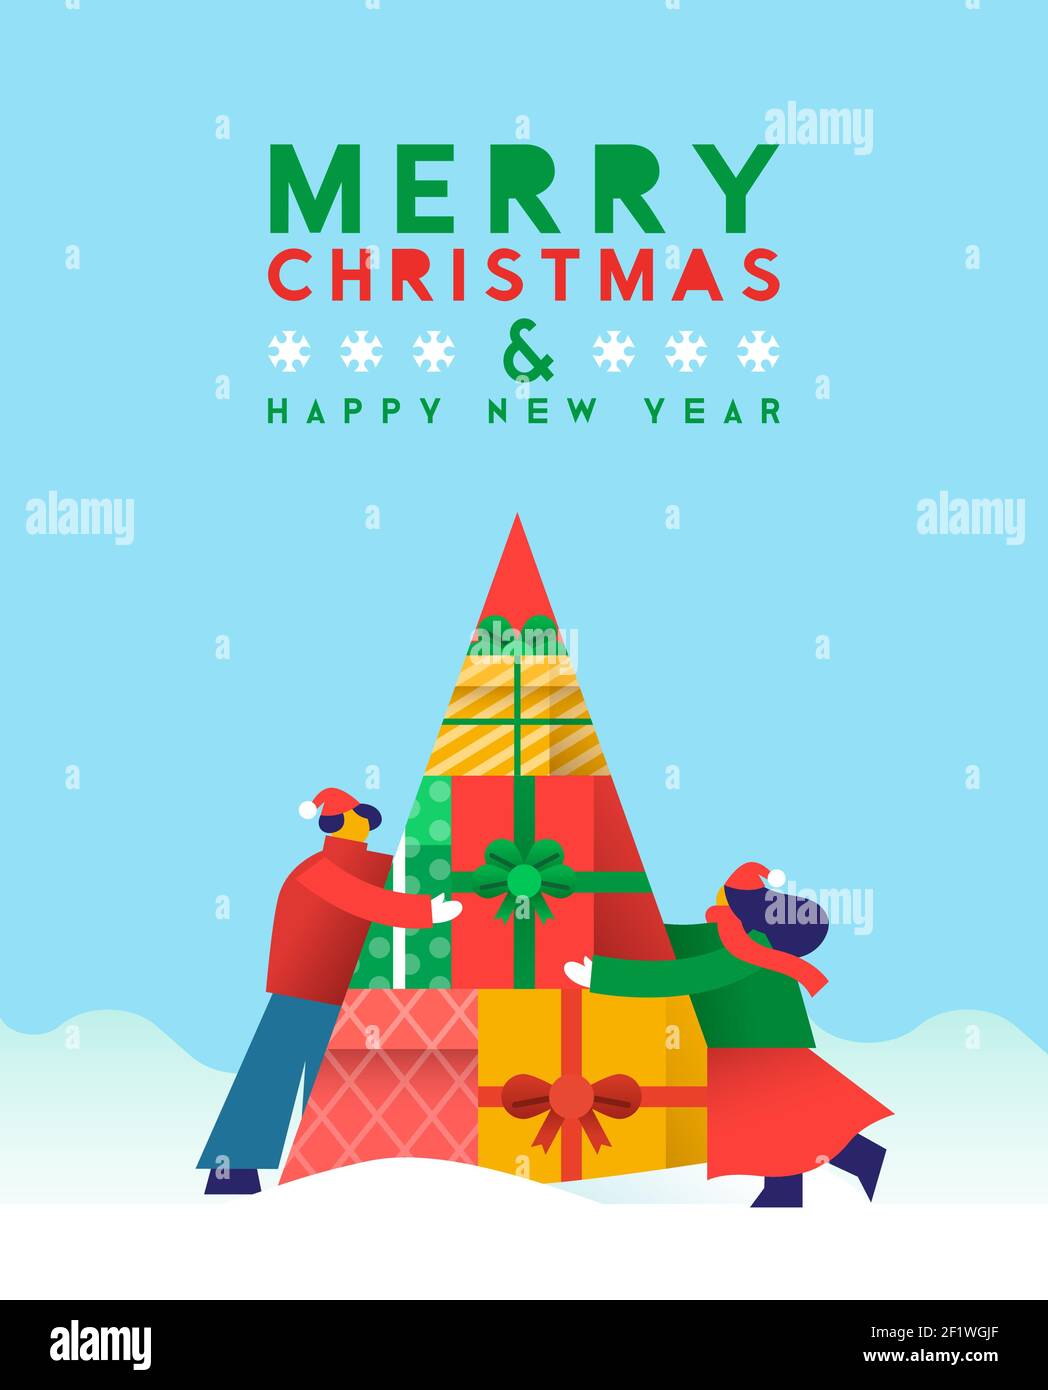 Merry christmas Happy New Year greeting card illustration. Man and woman friends helping on xmas gift pine tree together. Holiday social teamwork conc Stock Vector